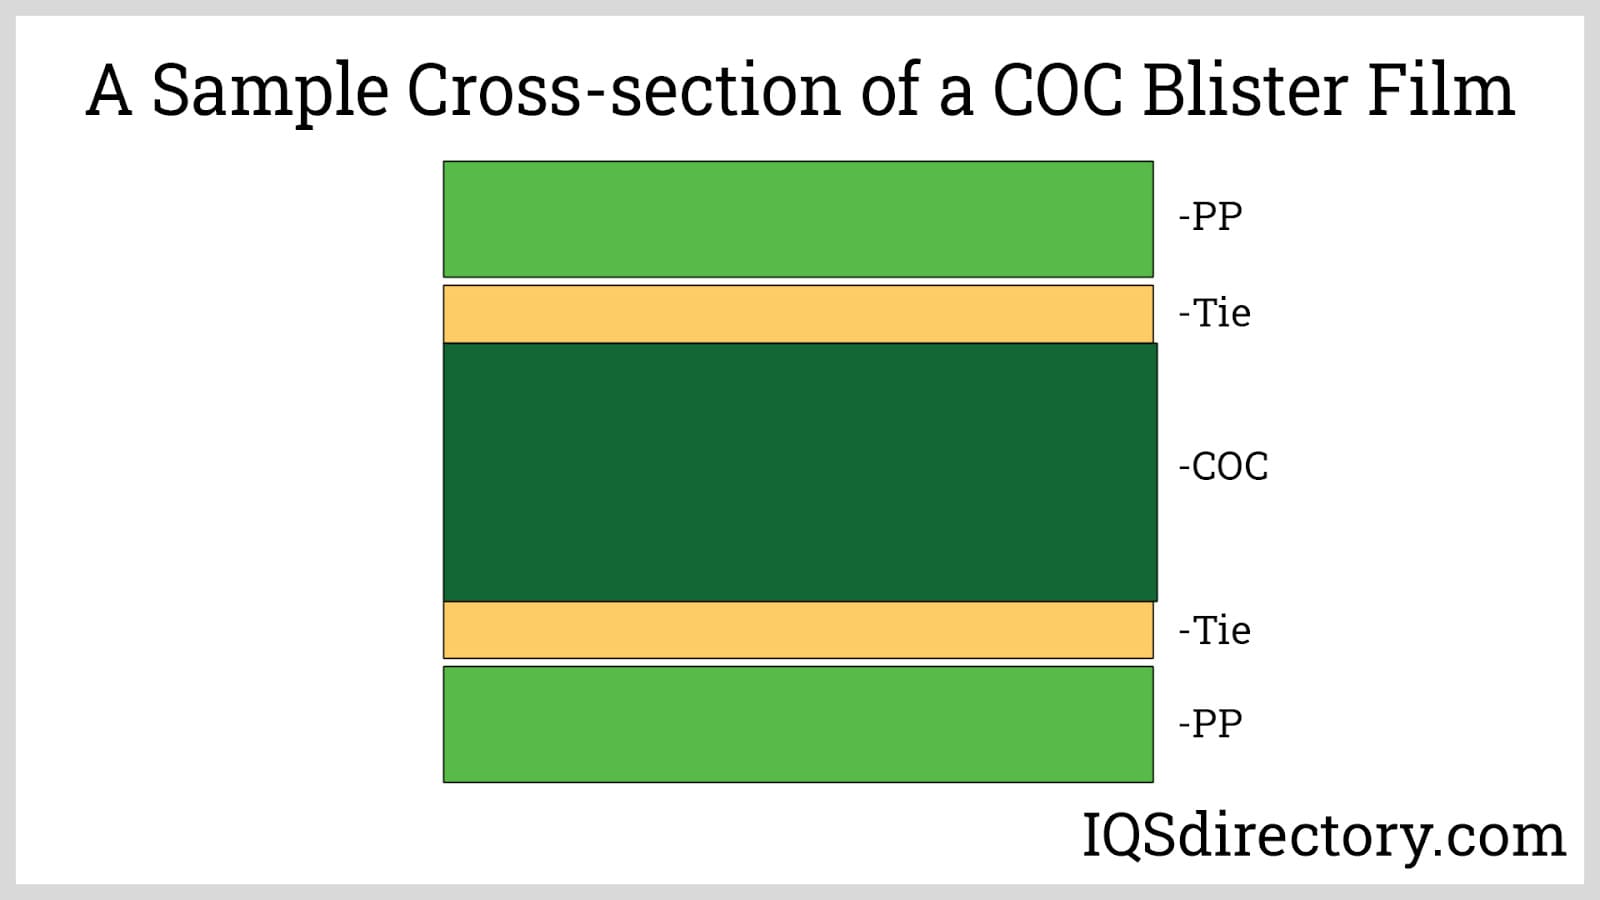 A Sample Cross-section of a COC Blister Film